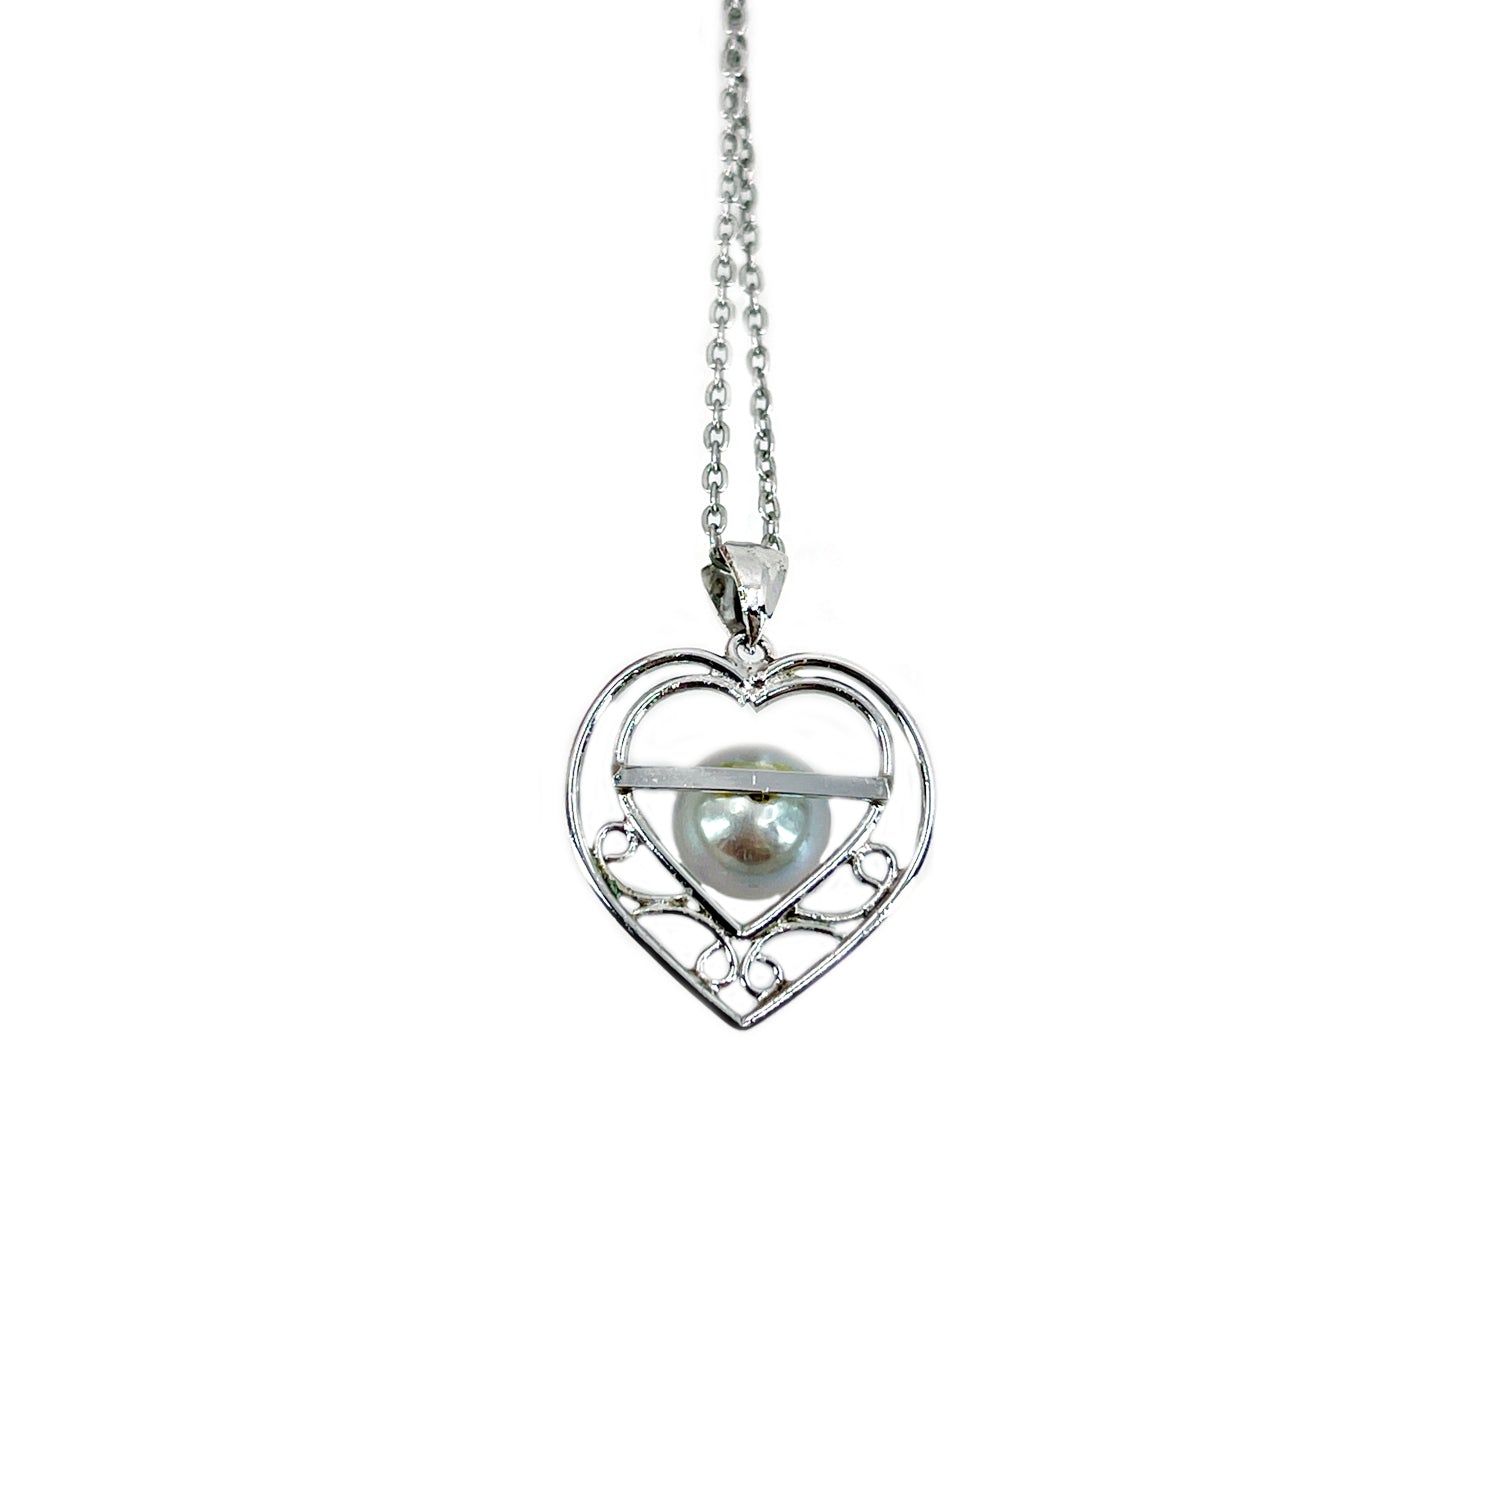 Heart Retro Vintage Blue Japanese Saltwater Akoya Pearl Necklace- Sterling Silver 18 Inch